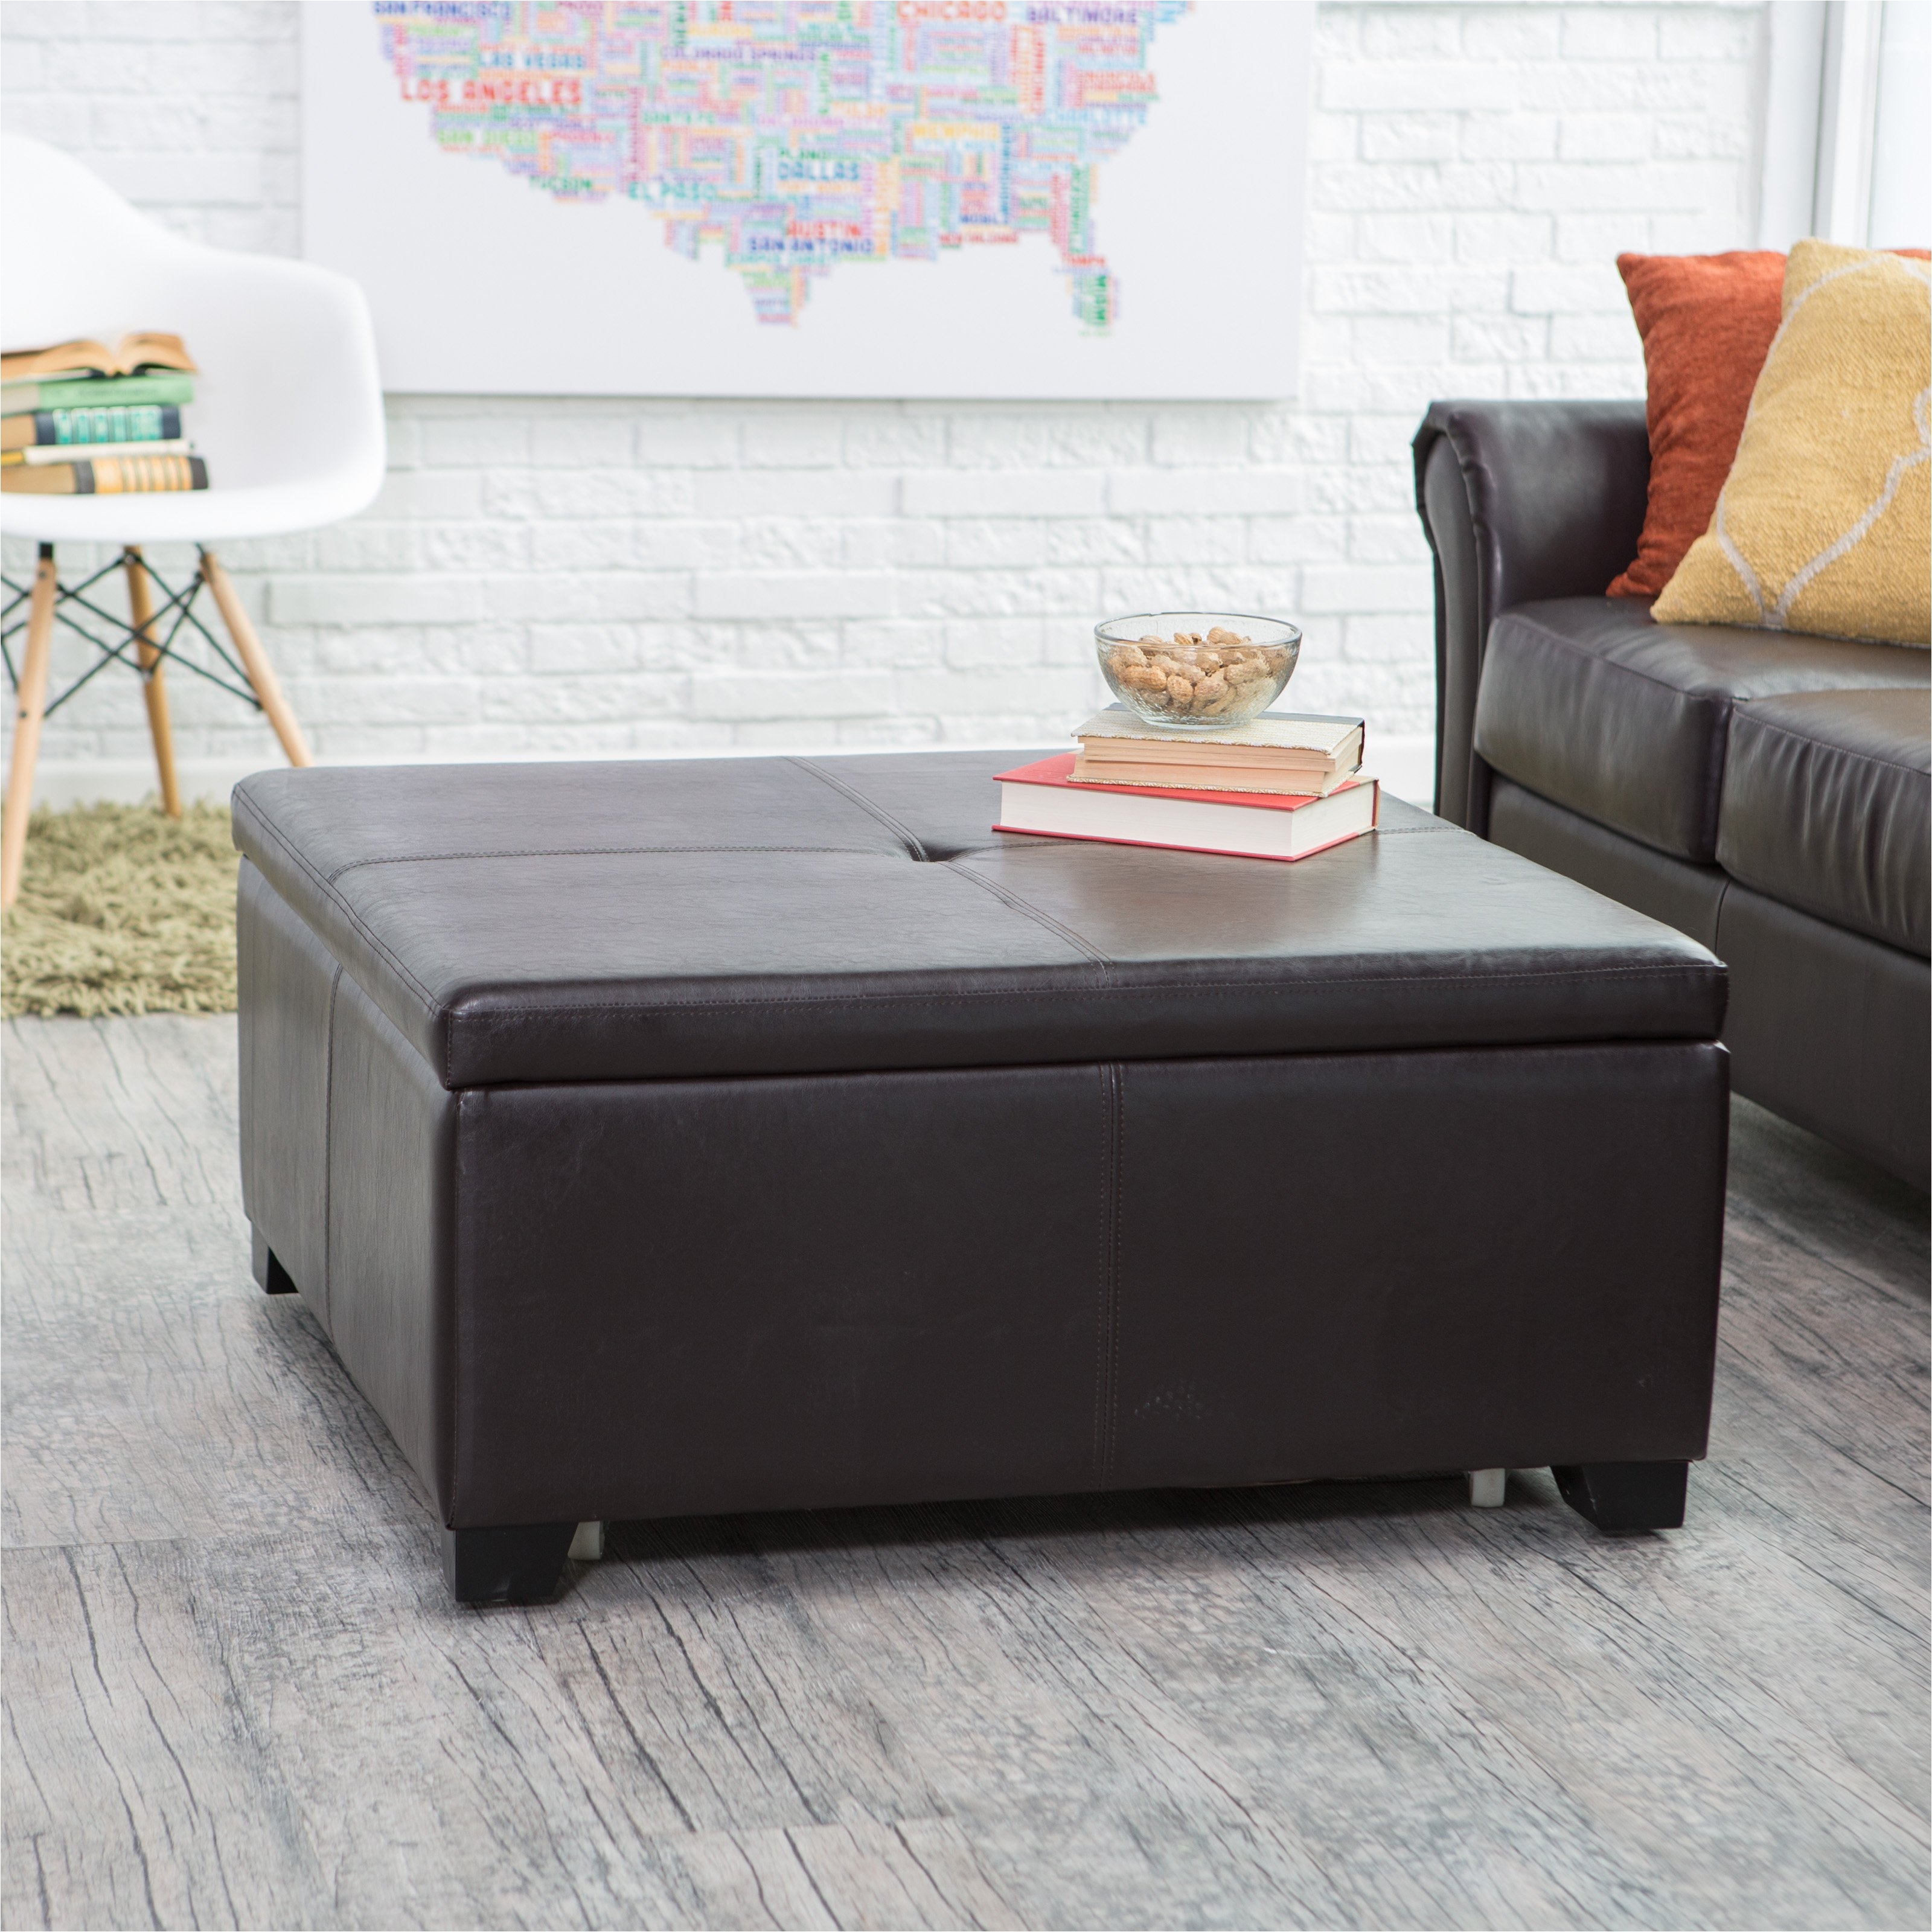 flip top ottoman coffee table Collection Full Size of Living Room ottoman Ideas For Living